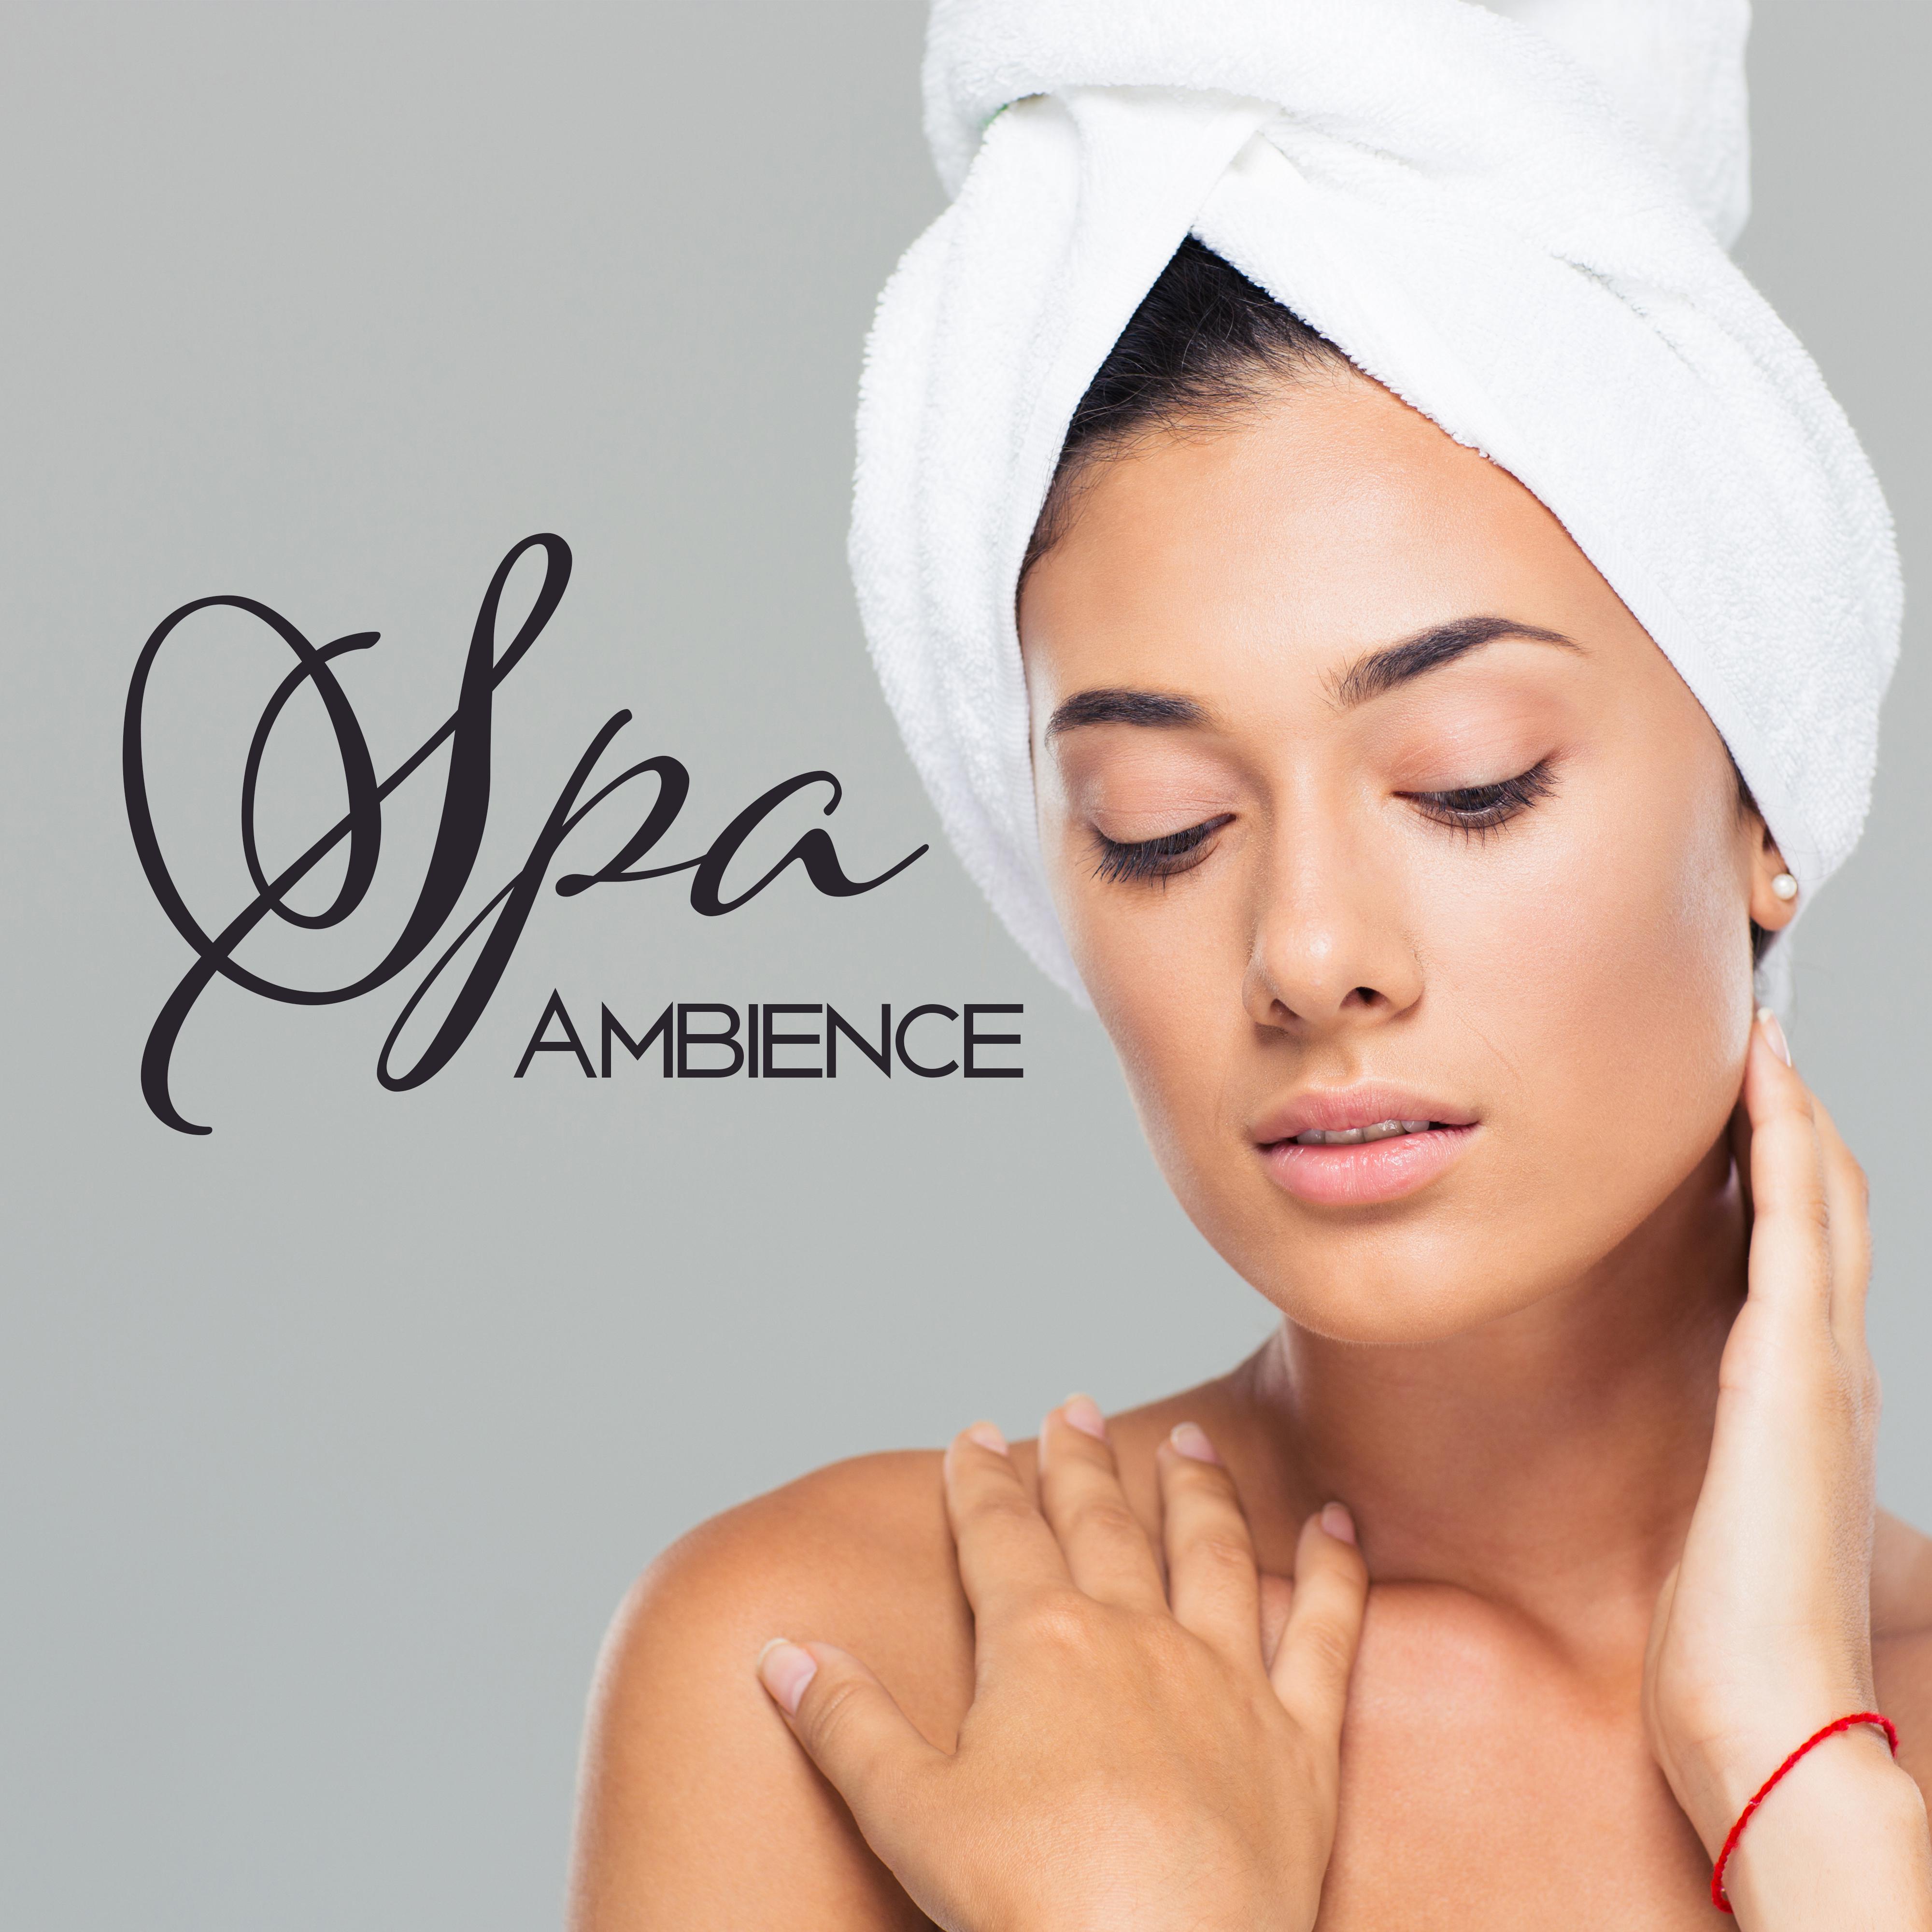 Spa Ambience – Relax with Nature Sounds, Spa & Wellness, Massage, Beauty Treatments